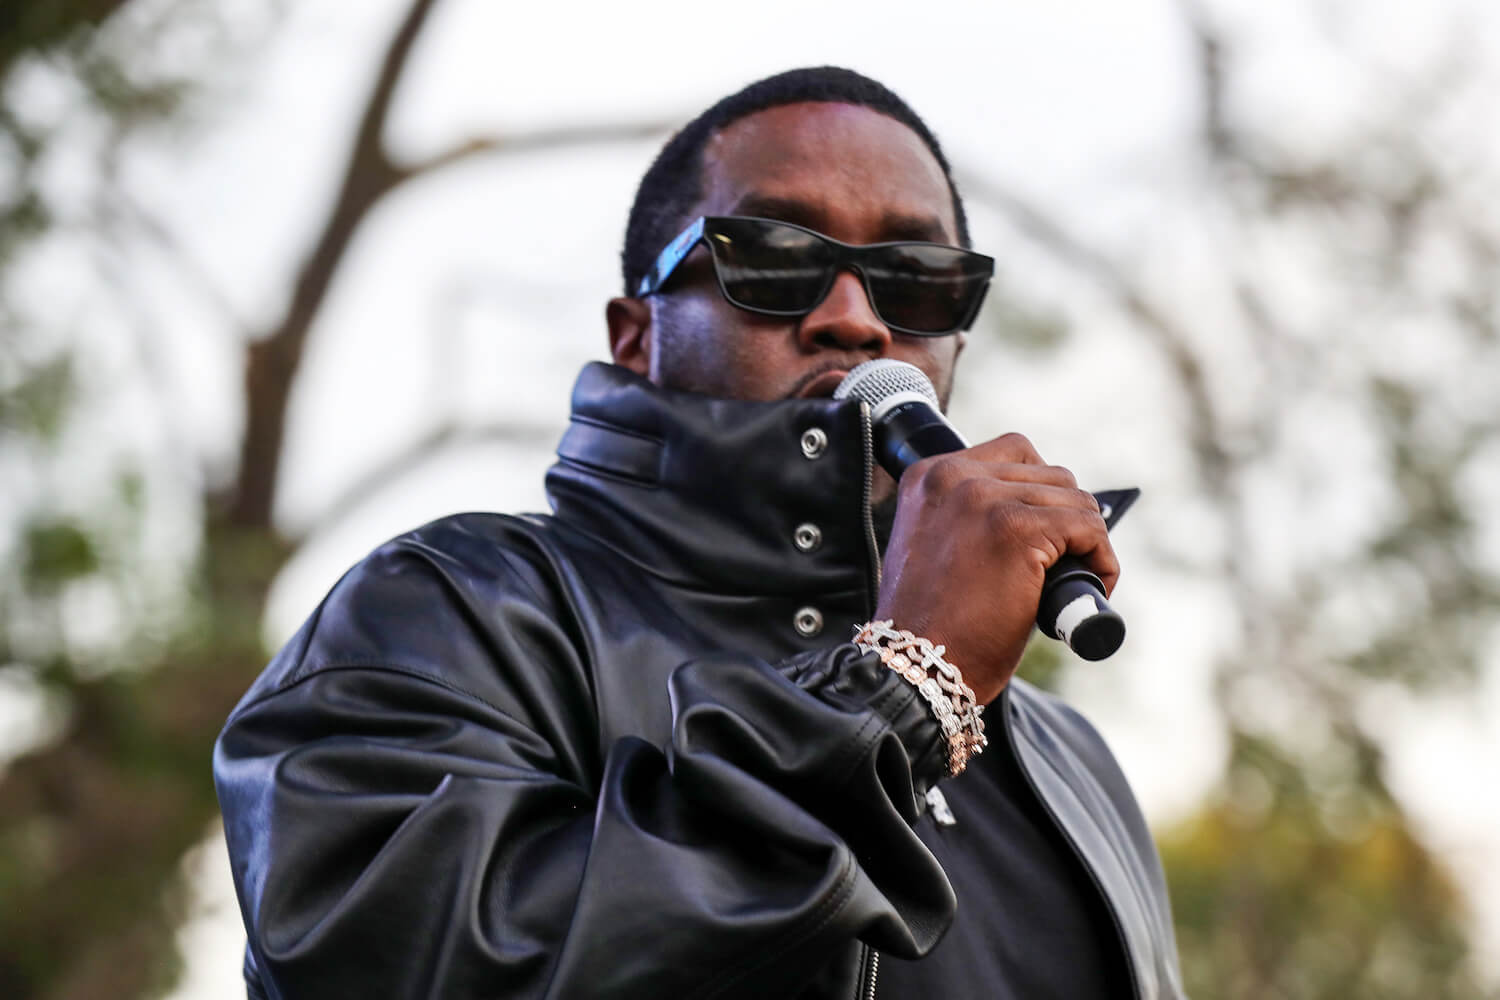 Sean 'P. Diddy' Combs holding a microphone up to his mouth while outside. He's wearing a leather jacket and sunglasses.